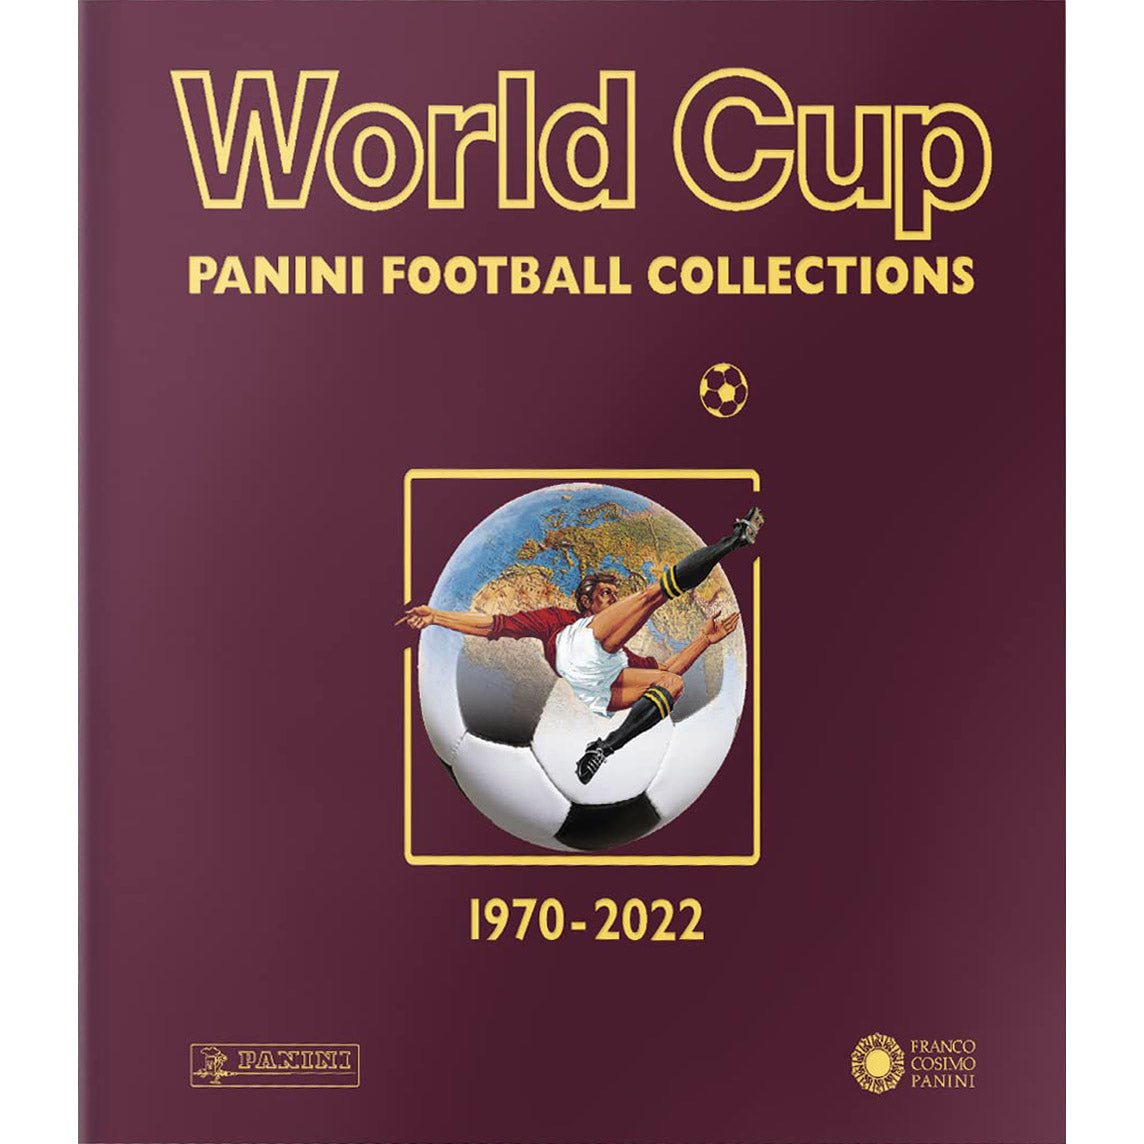 Panini Football Collections – World Cup 1970-2022